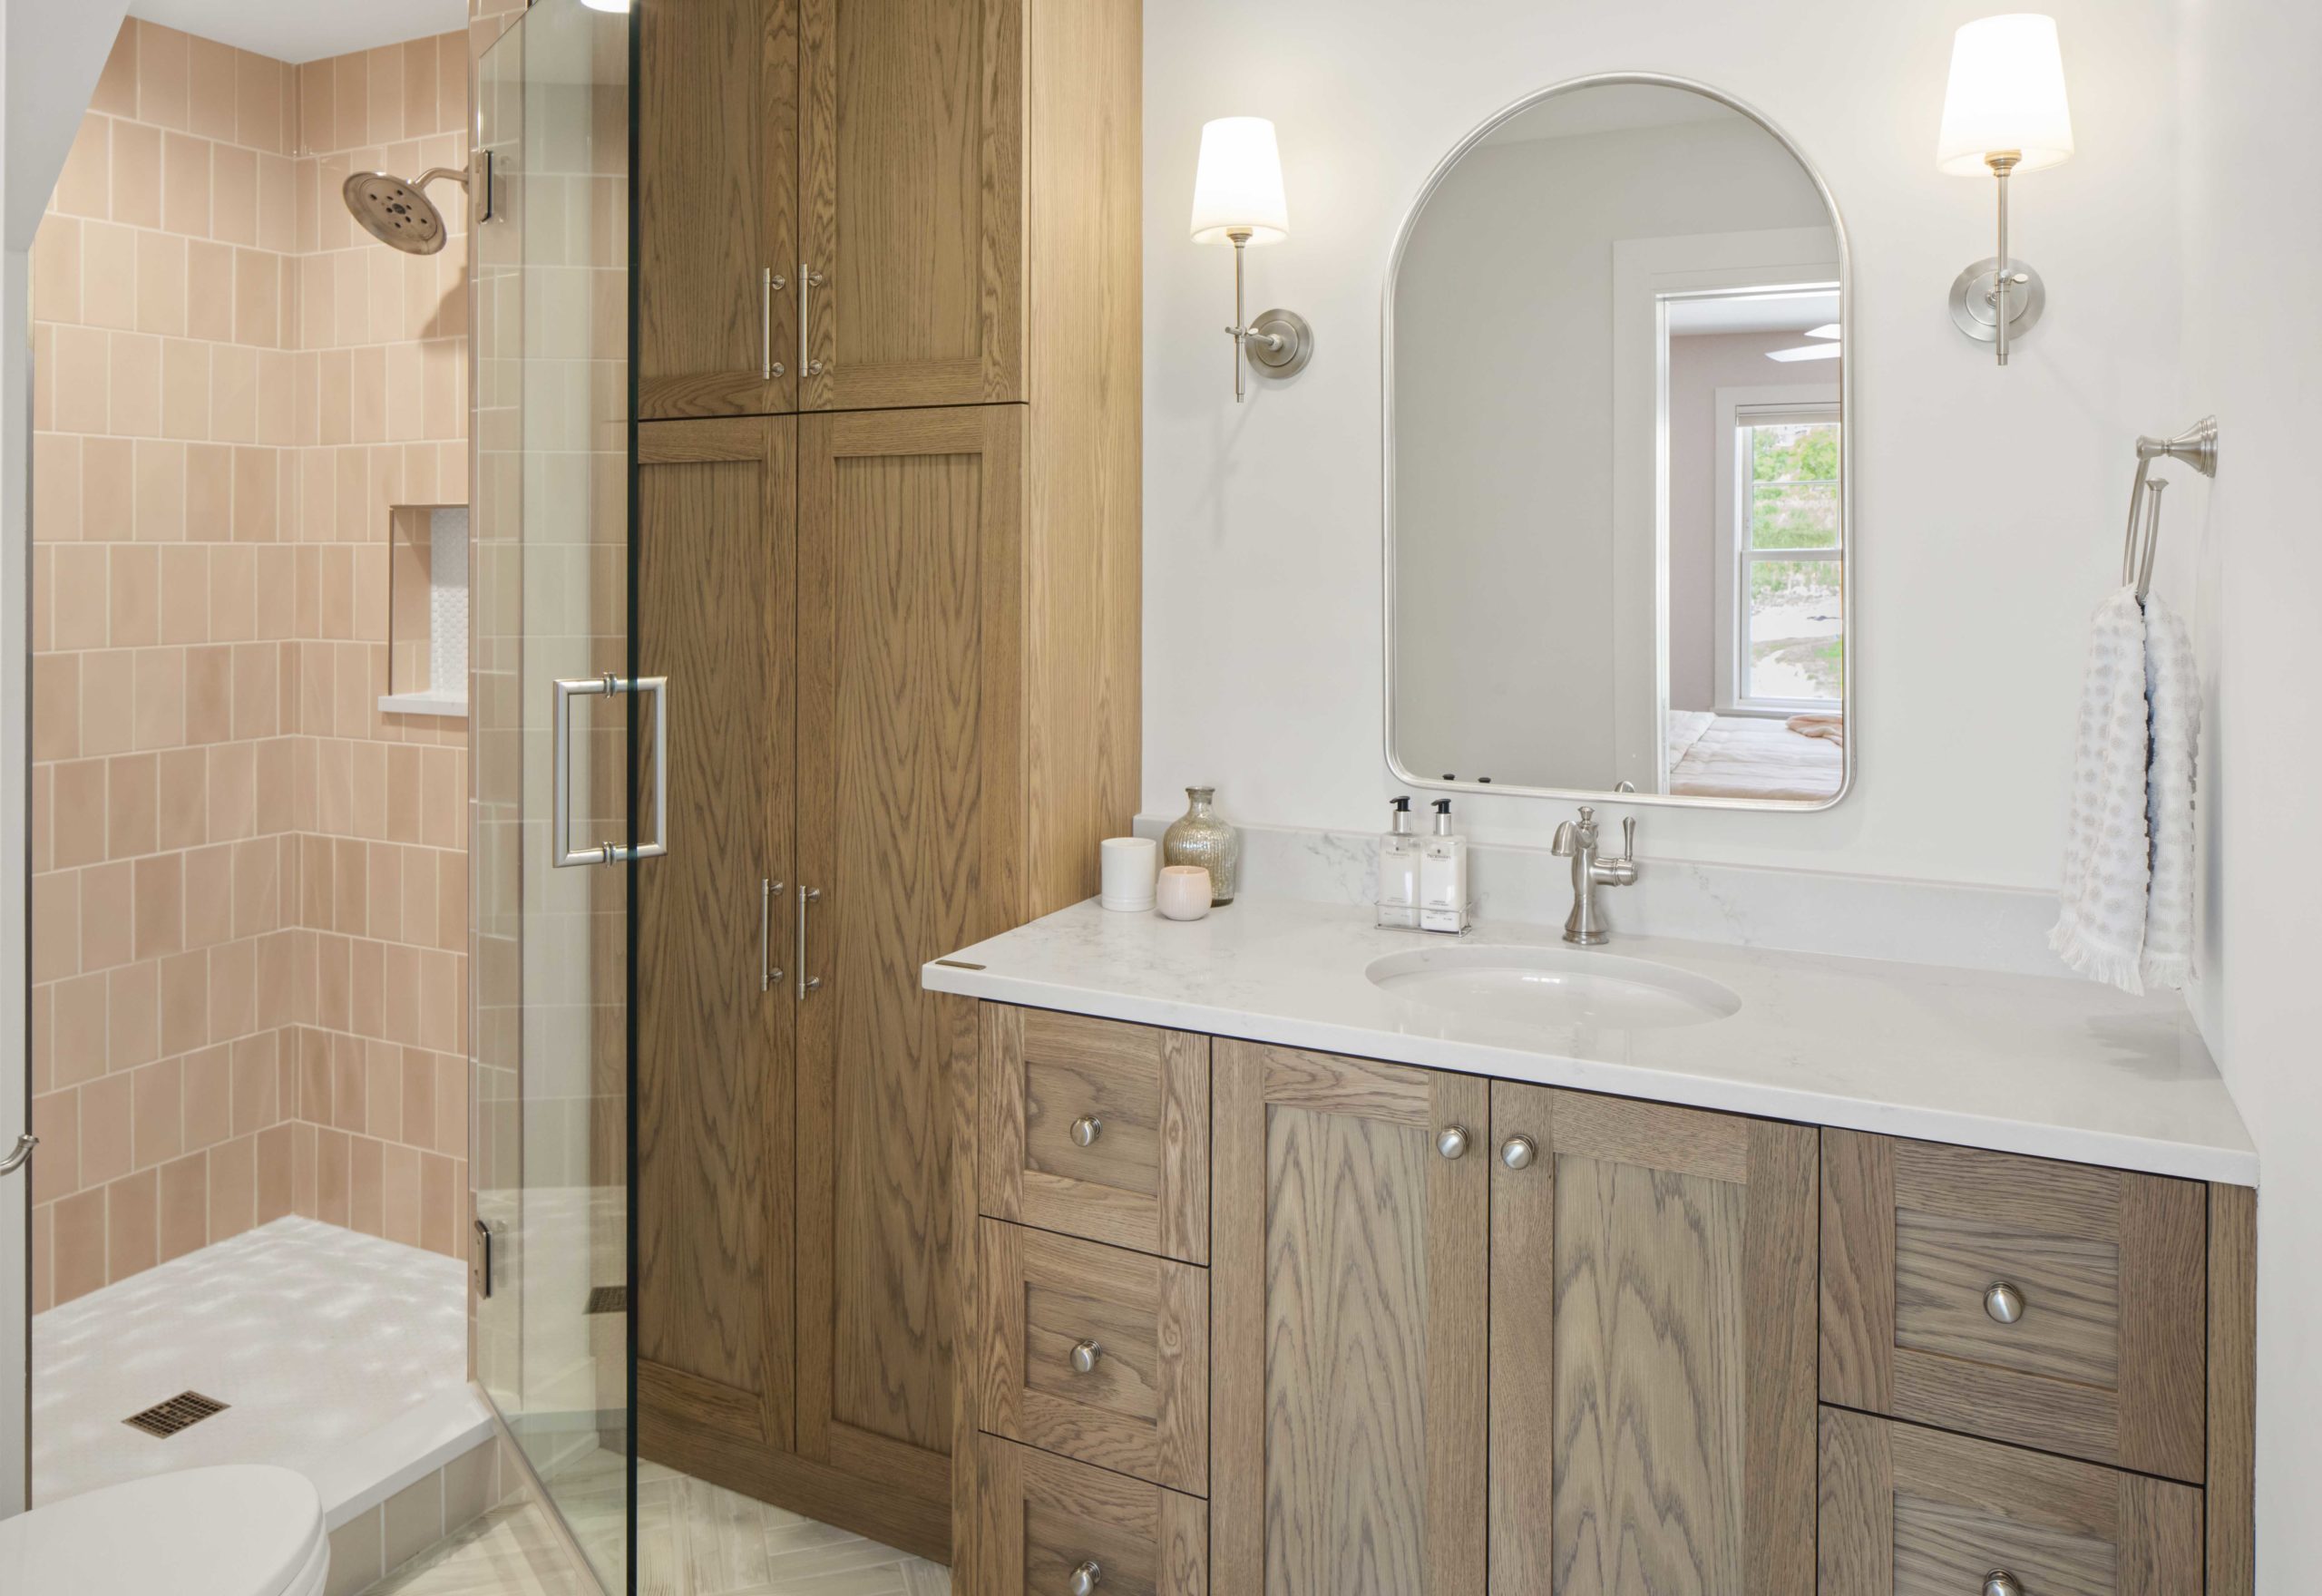 A custom lake home bathroom with wooden cabinets and a glass shower.